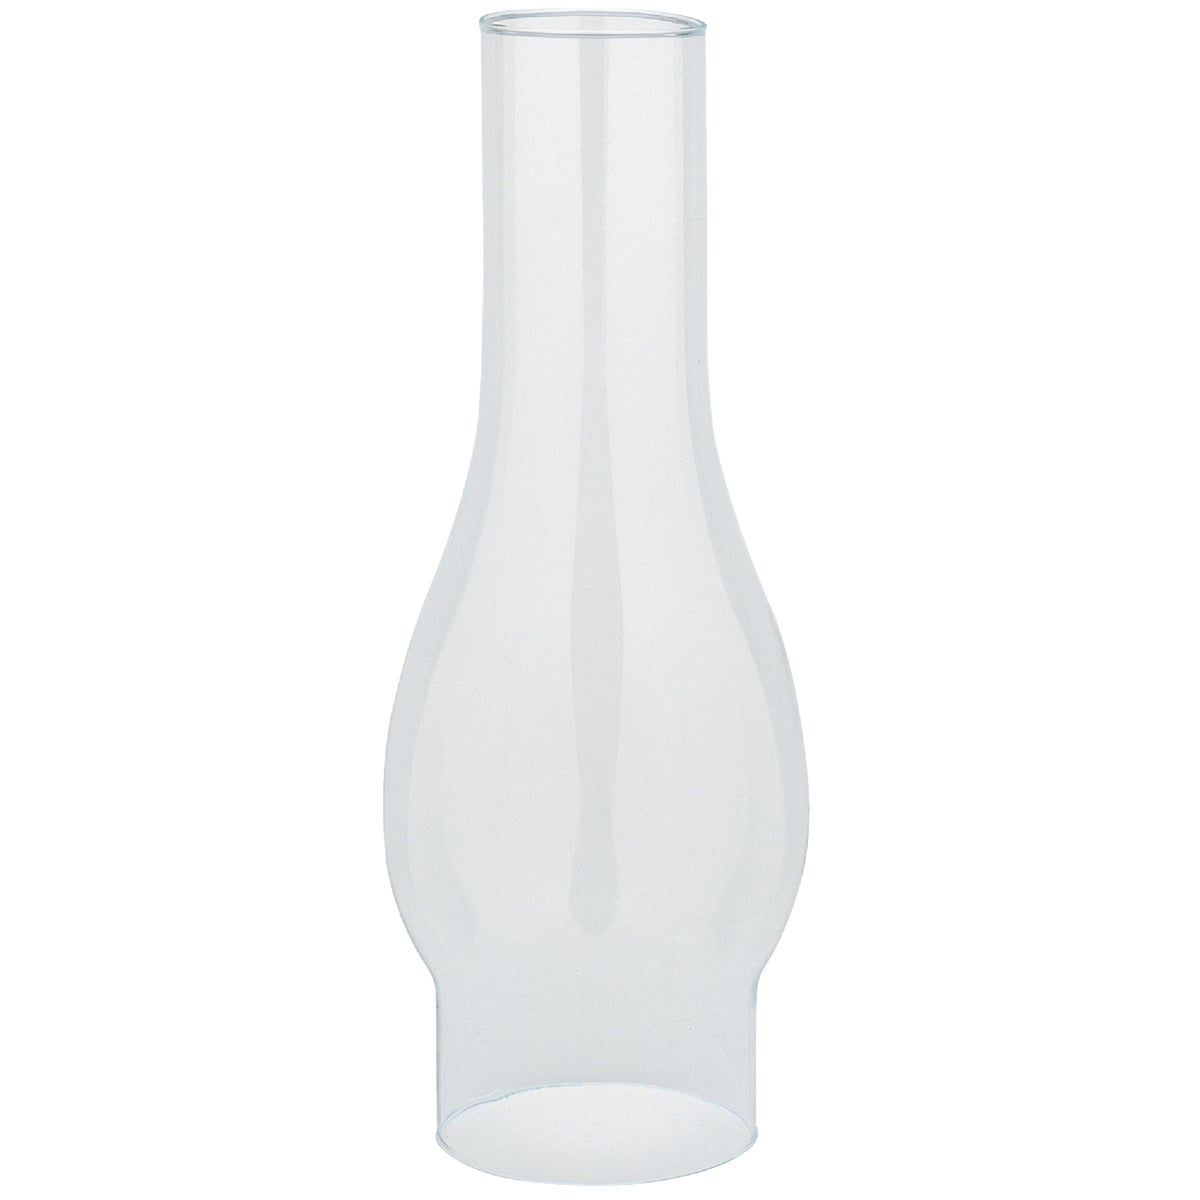 Item 502782, Clear glass top opening replacement lamp chimney. Easy to install. 2 In.